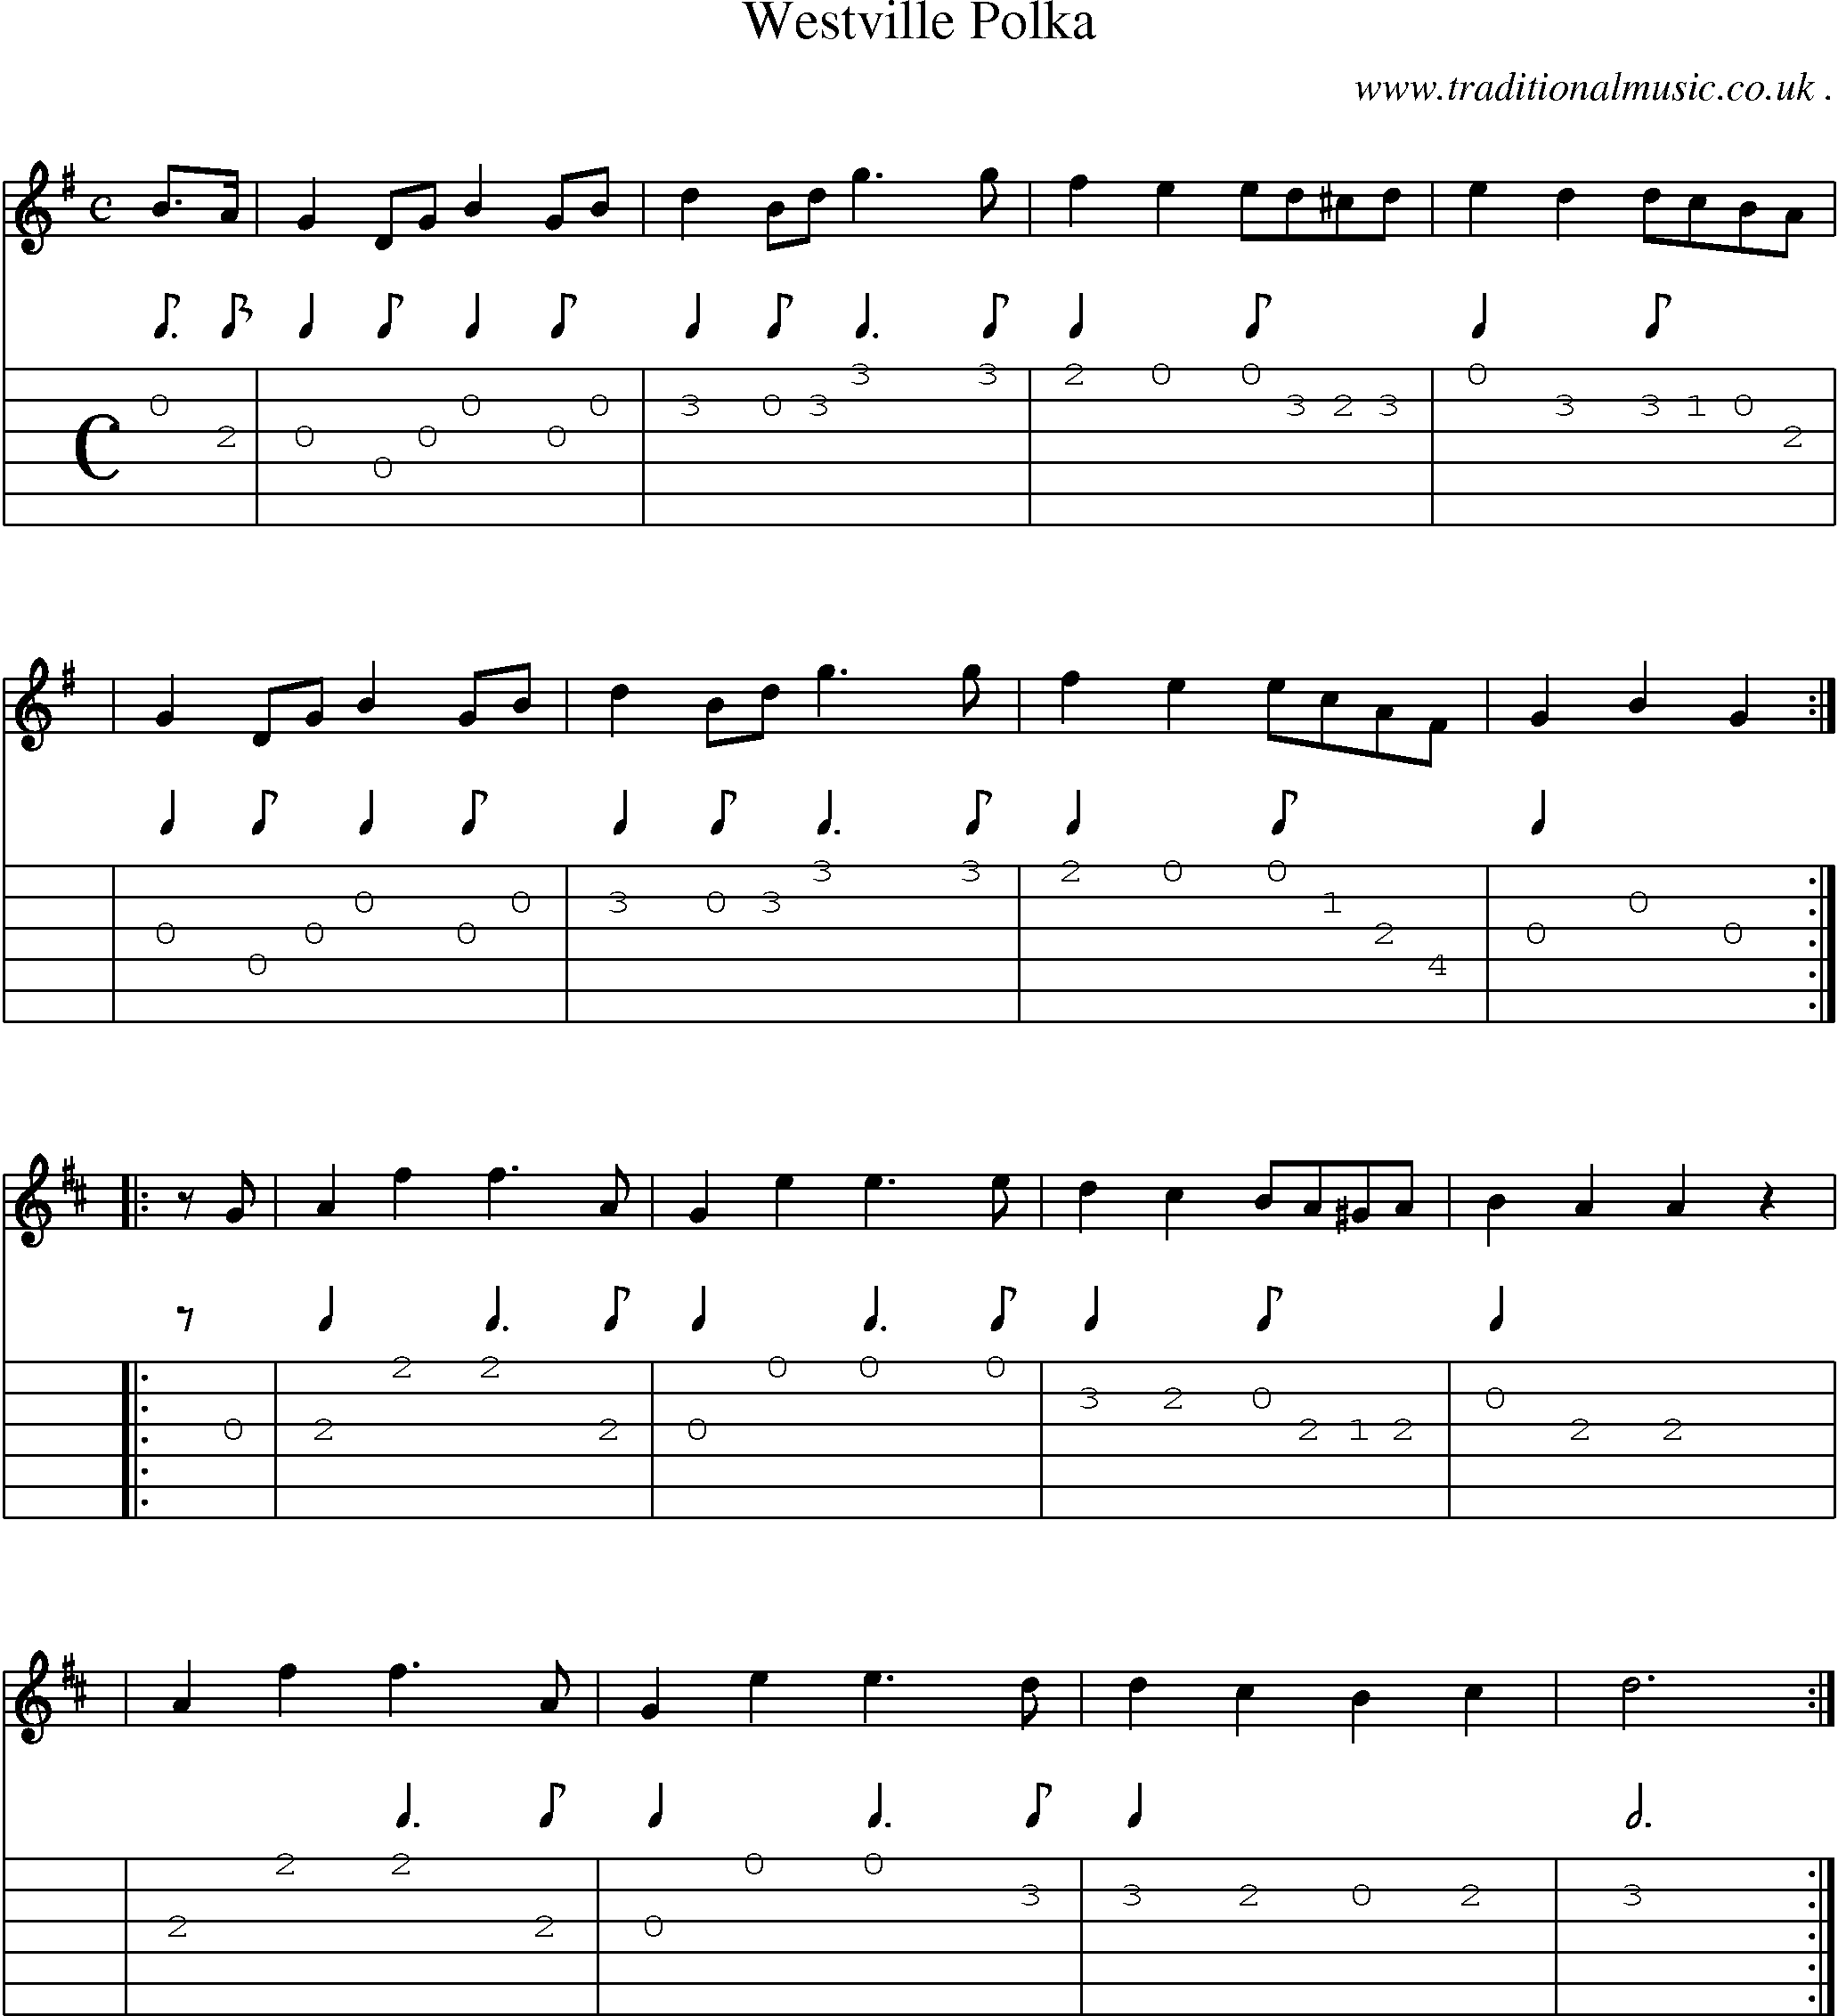 Sheet-Music and Guitar Tabs for Westville Polka